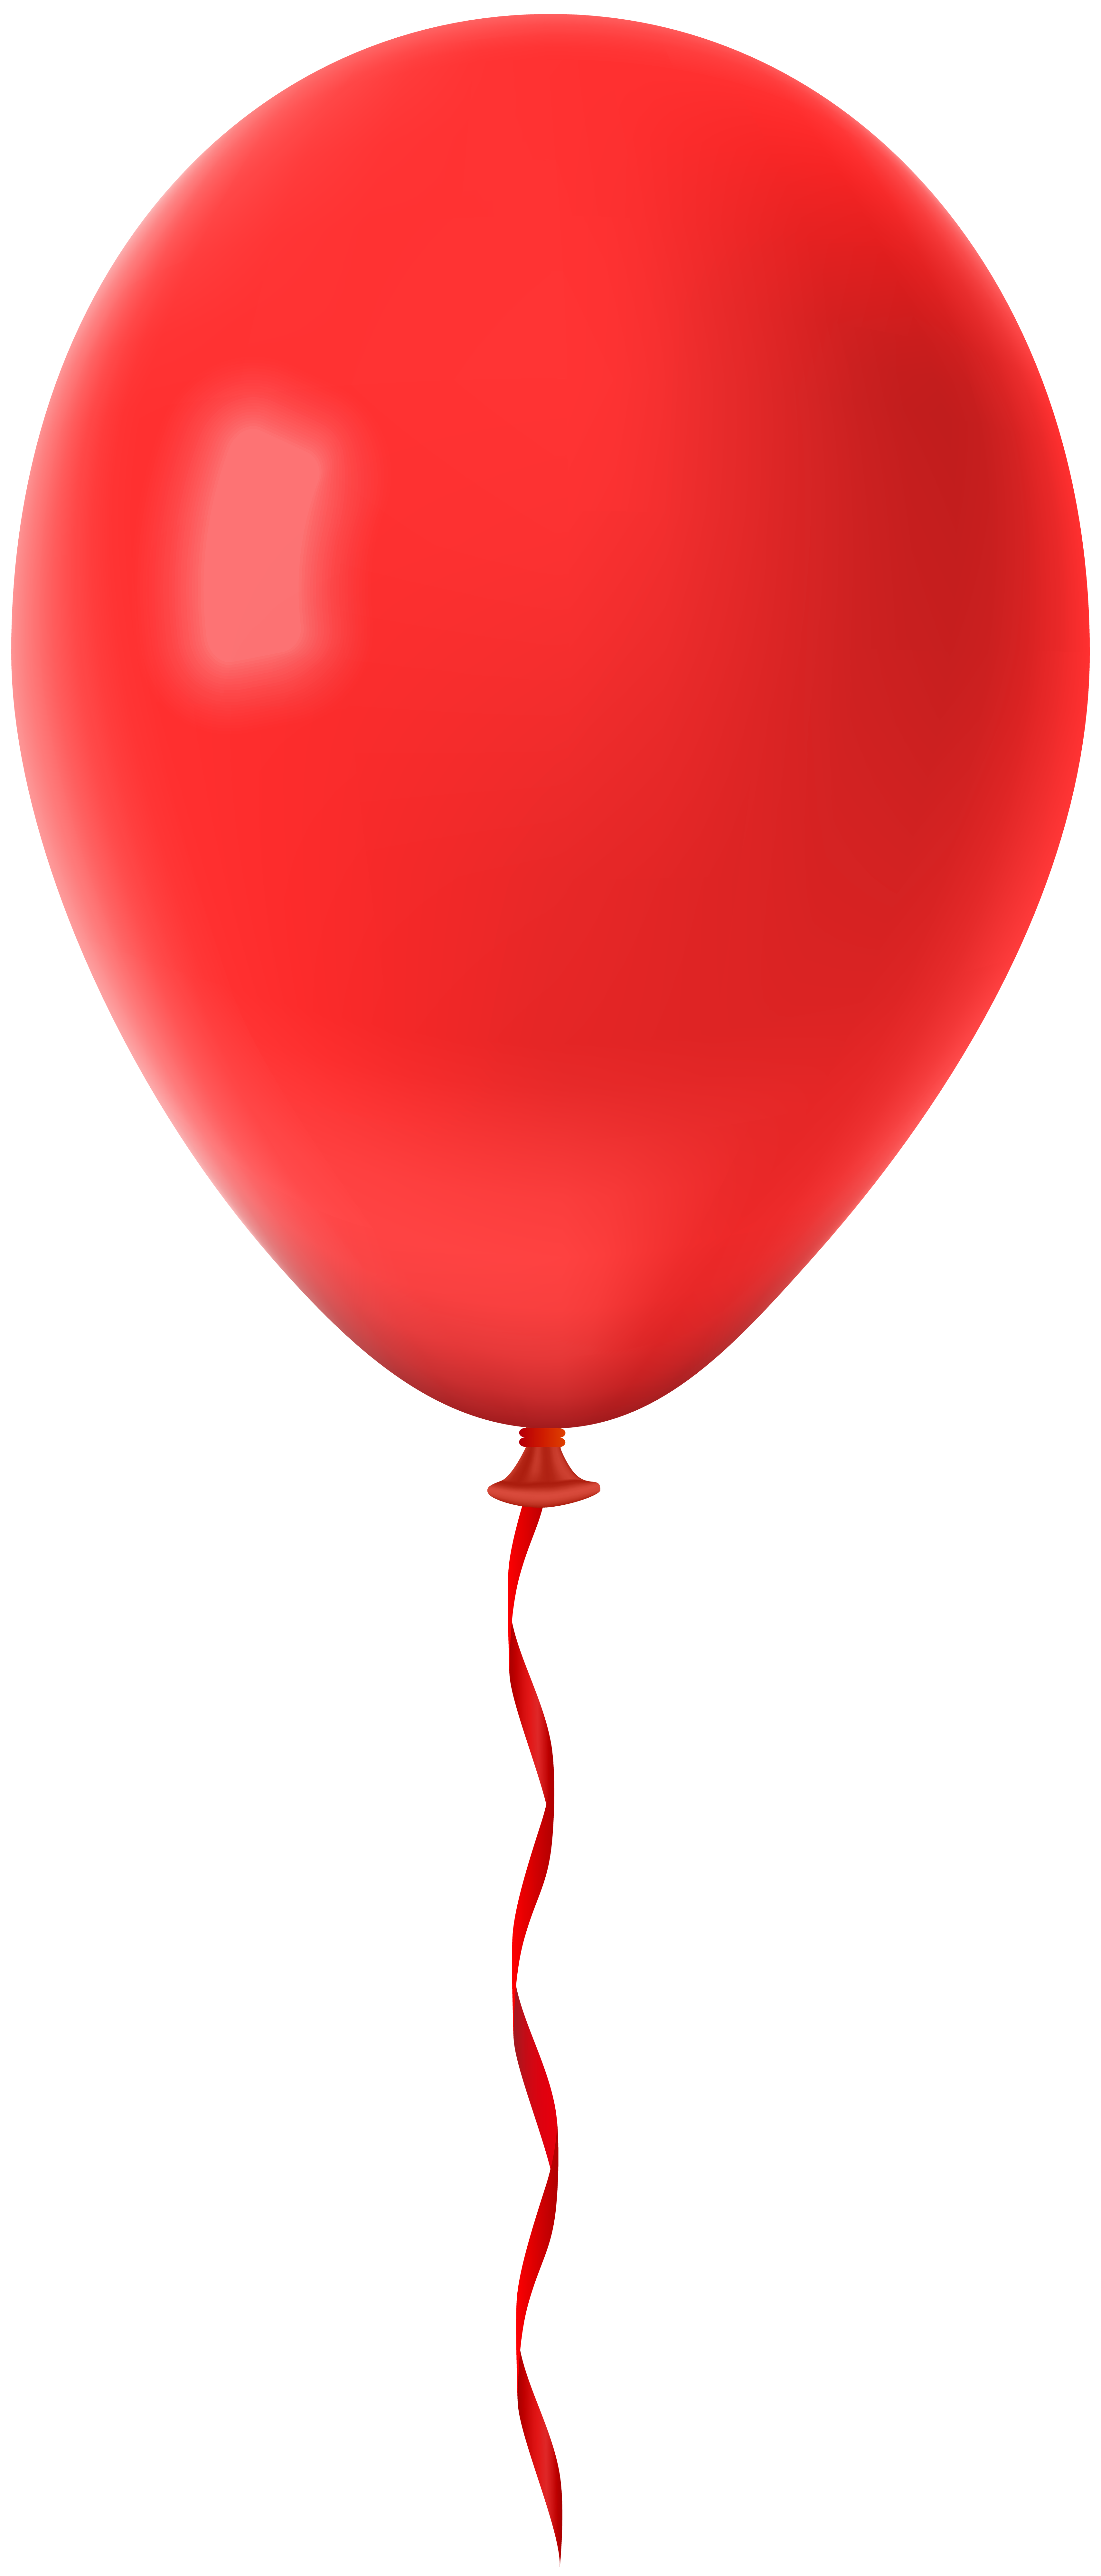 Free Red Balloon Transparent Background, Download Free Red Balloon ...